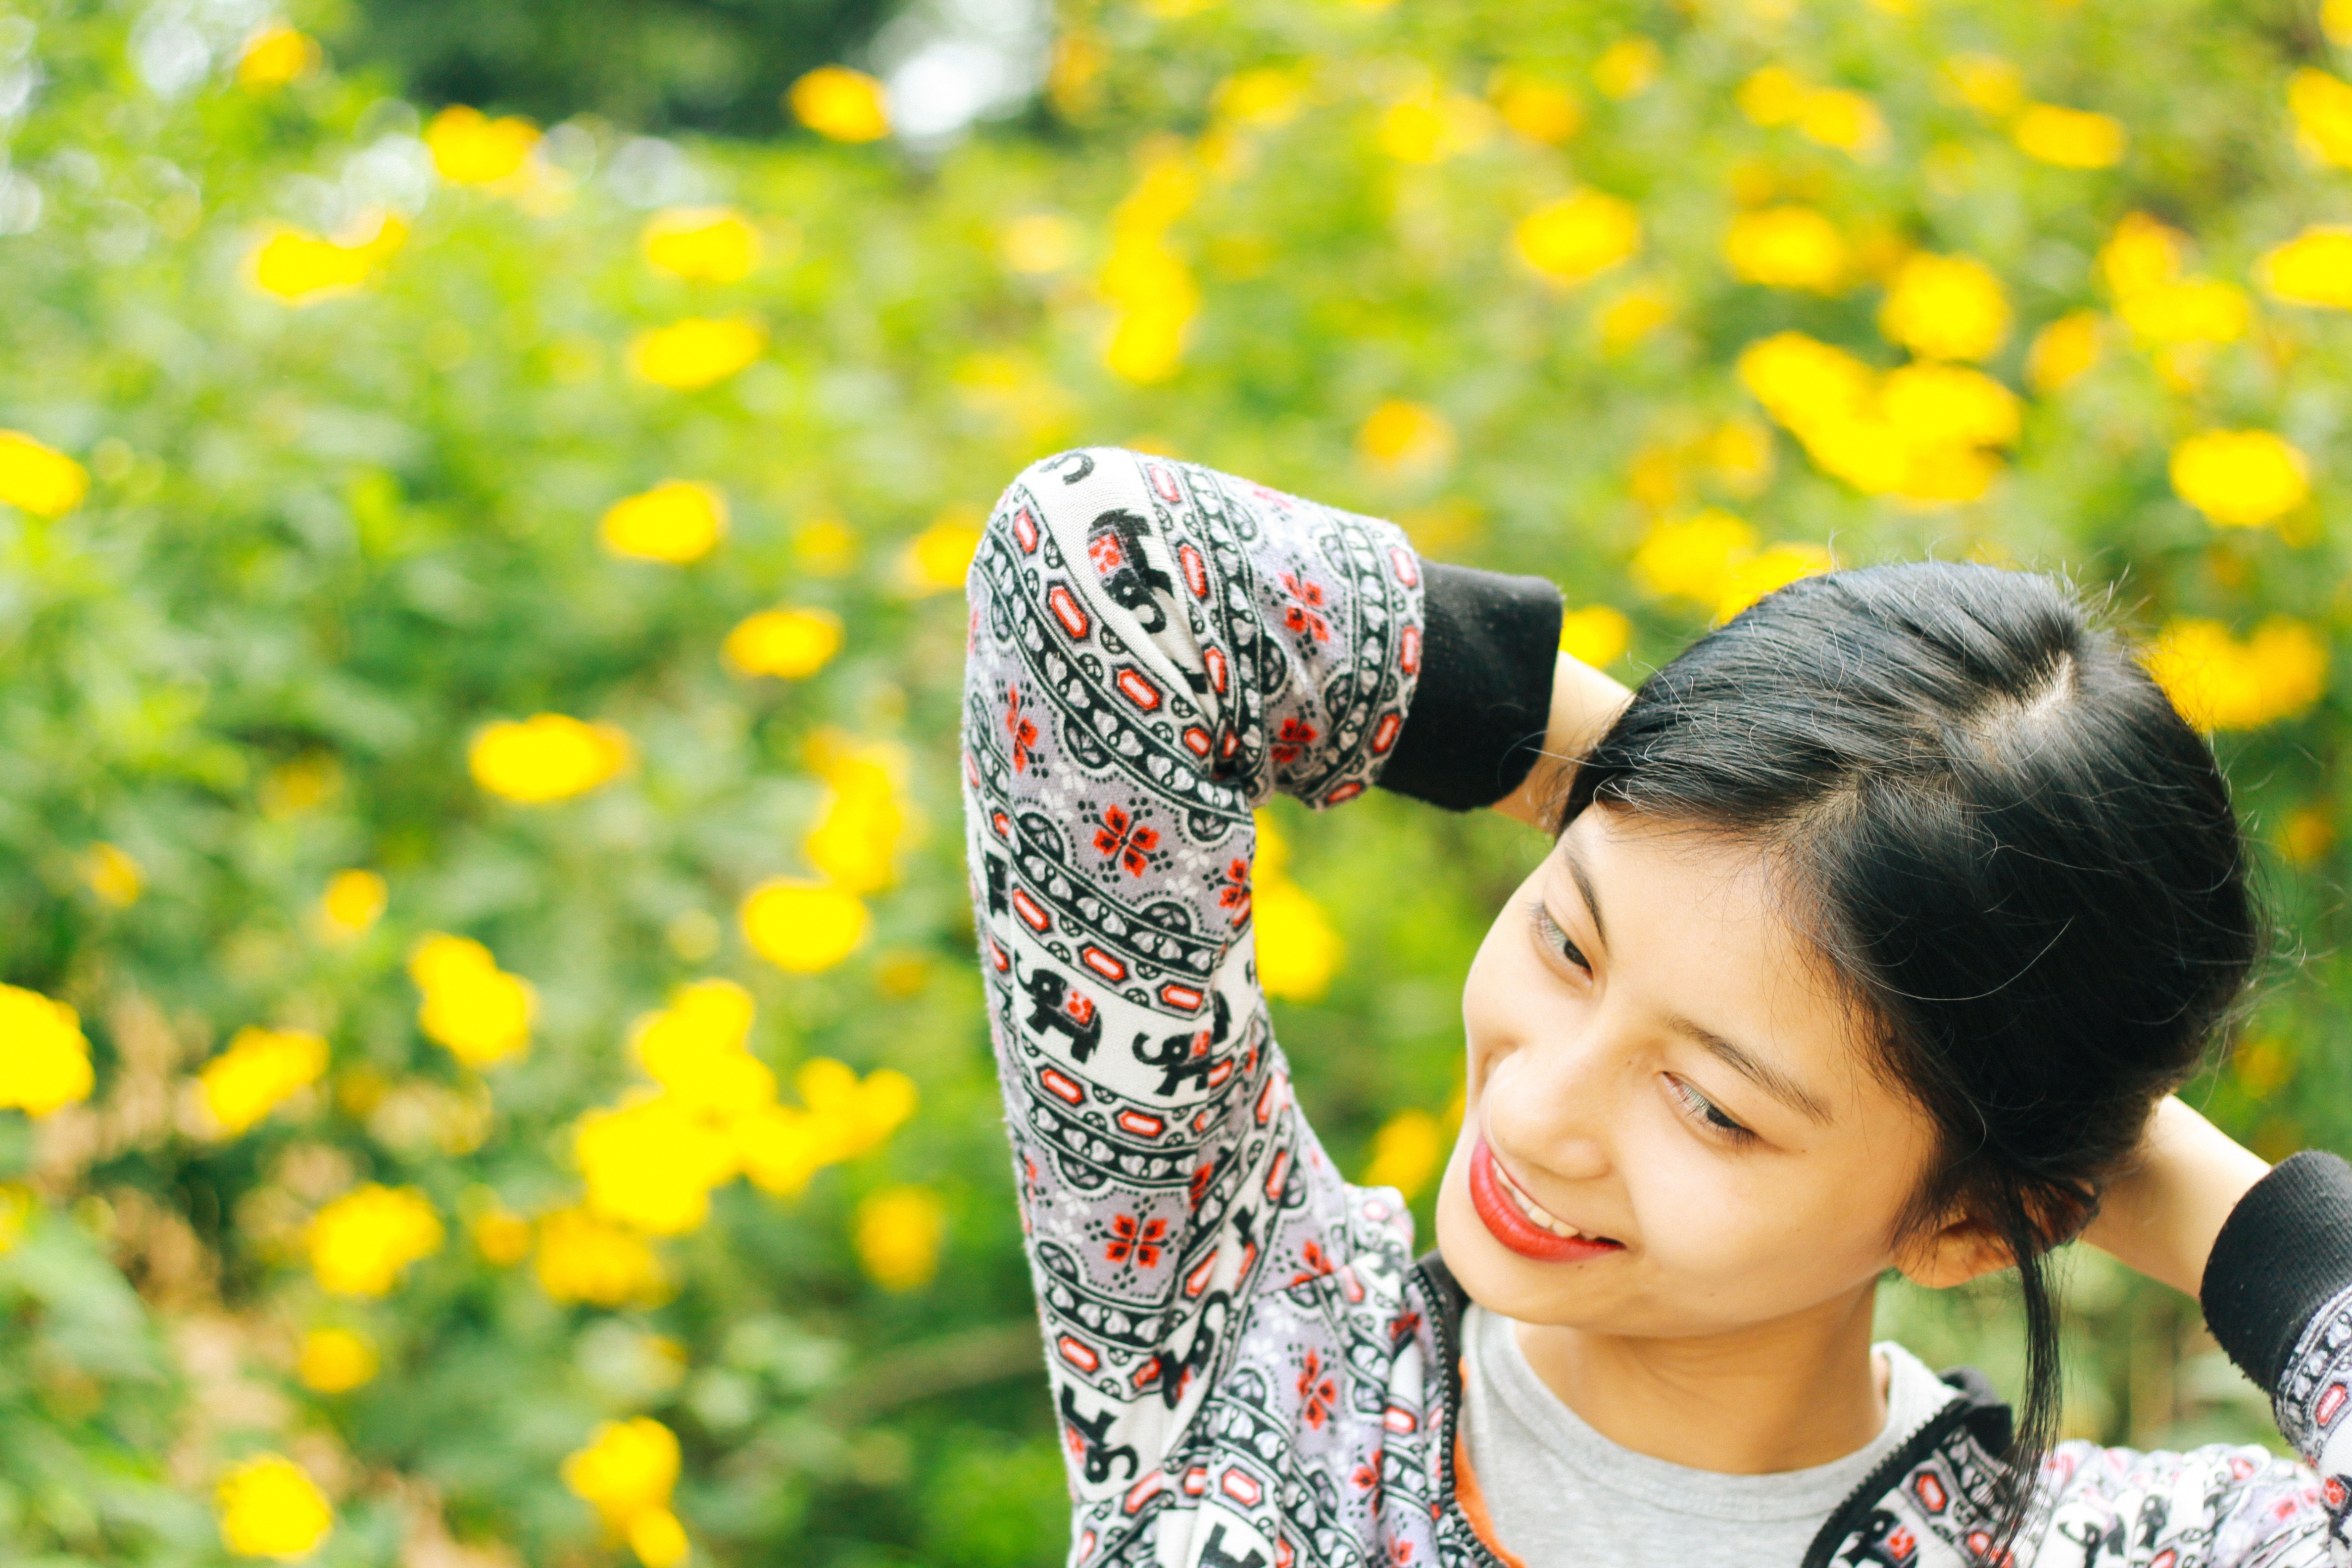 Nature, Smile, Girl, Wild Sunflower, childhood, one person